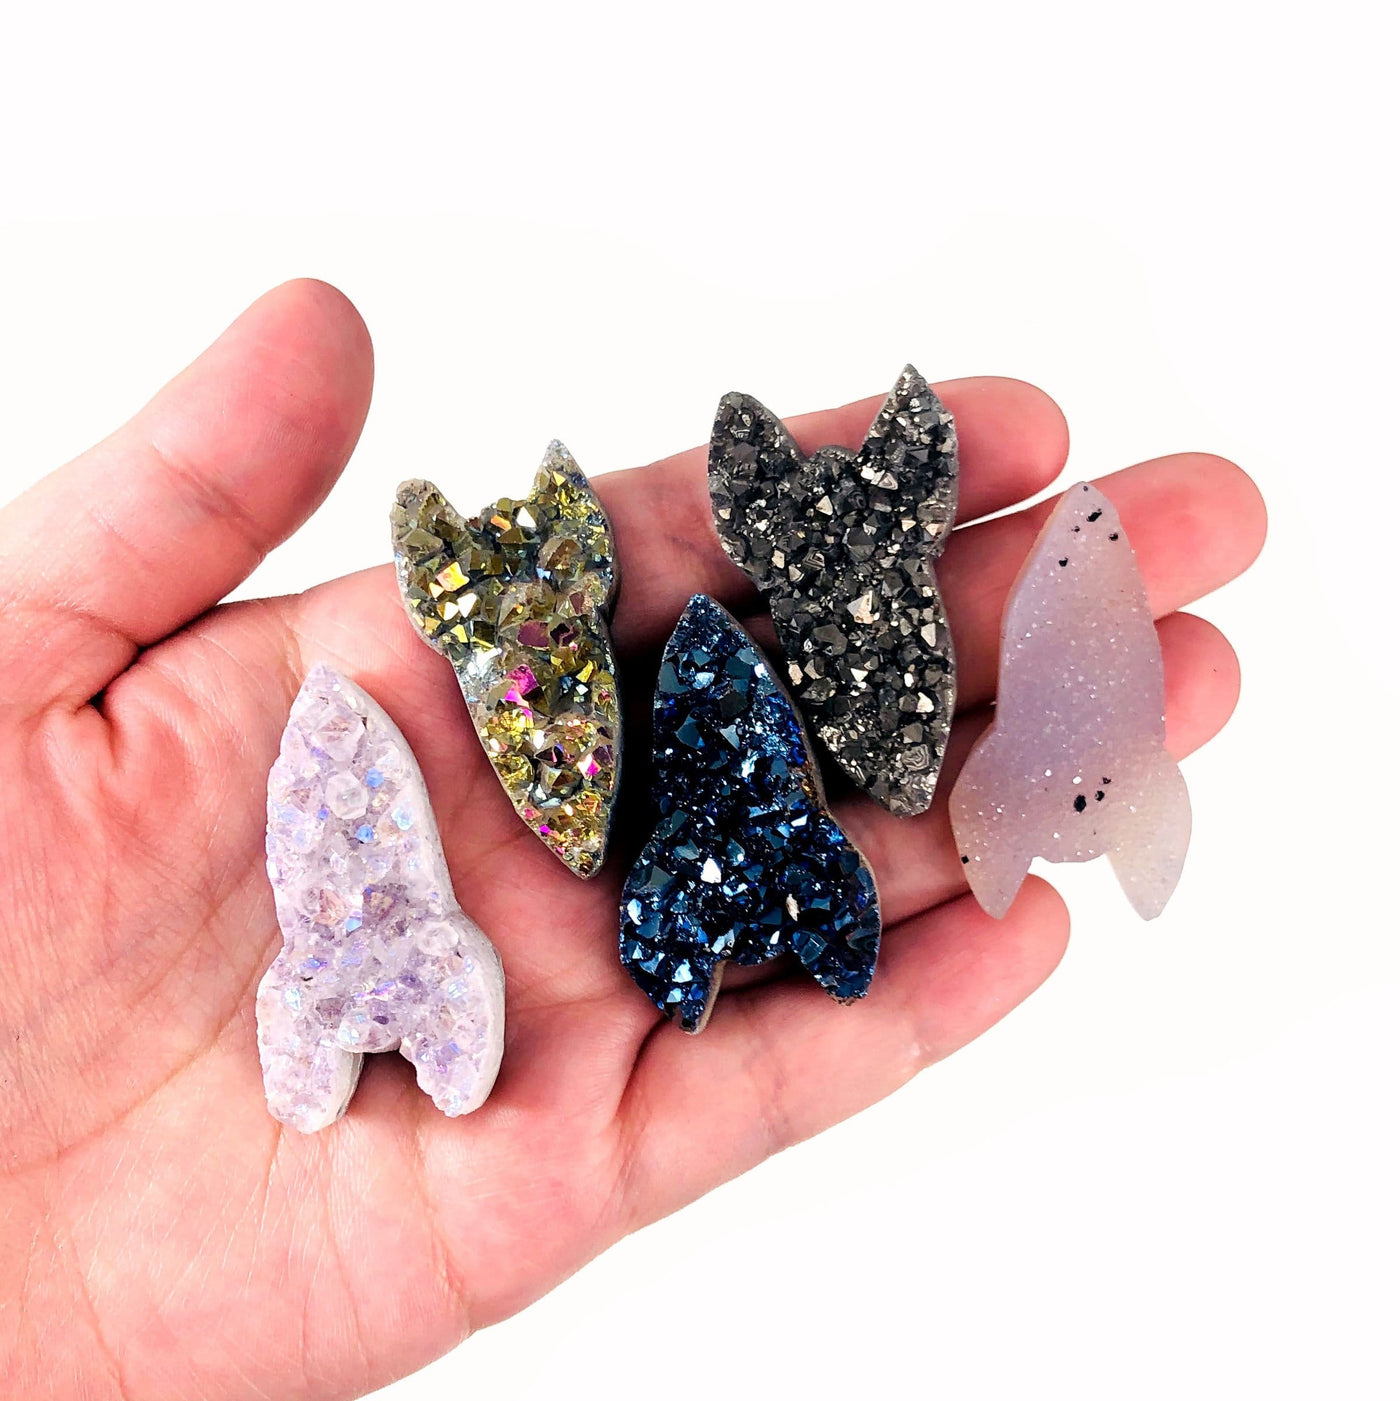 5 Druzy Rocket Shaped Cabochons in hand for size reference